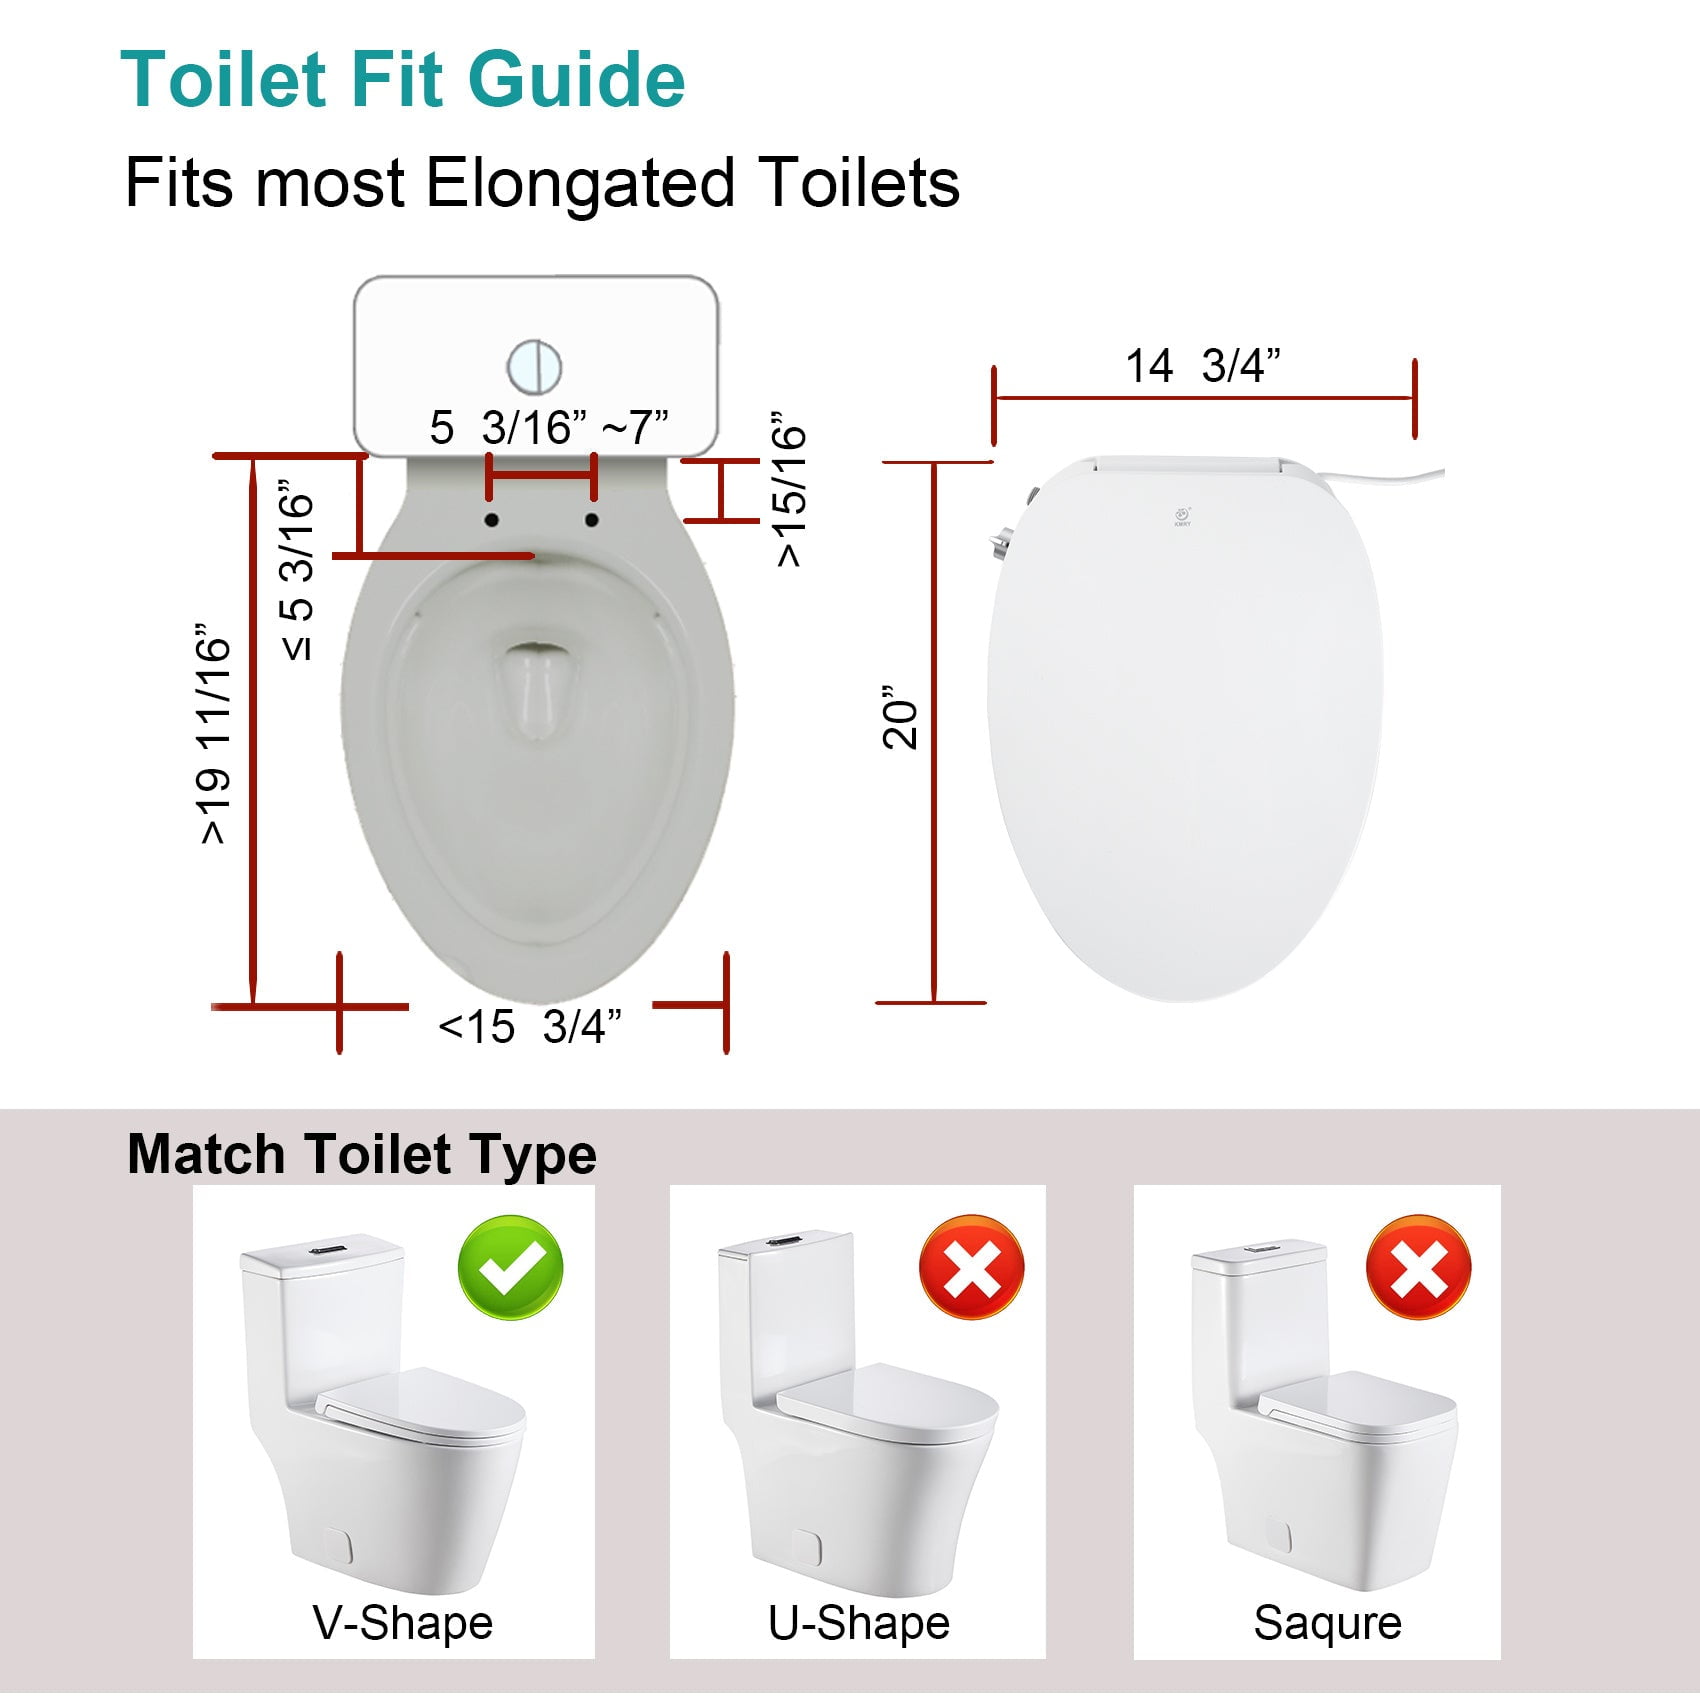 Ivyel J-2 Smart Electric Bidet for Toilet Seat, Fits Round toilets,Warm  water, Heated bidet toilet seat, Heated Dryer, Child Function, Stainless  Steel